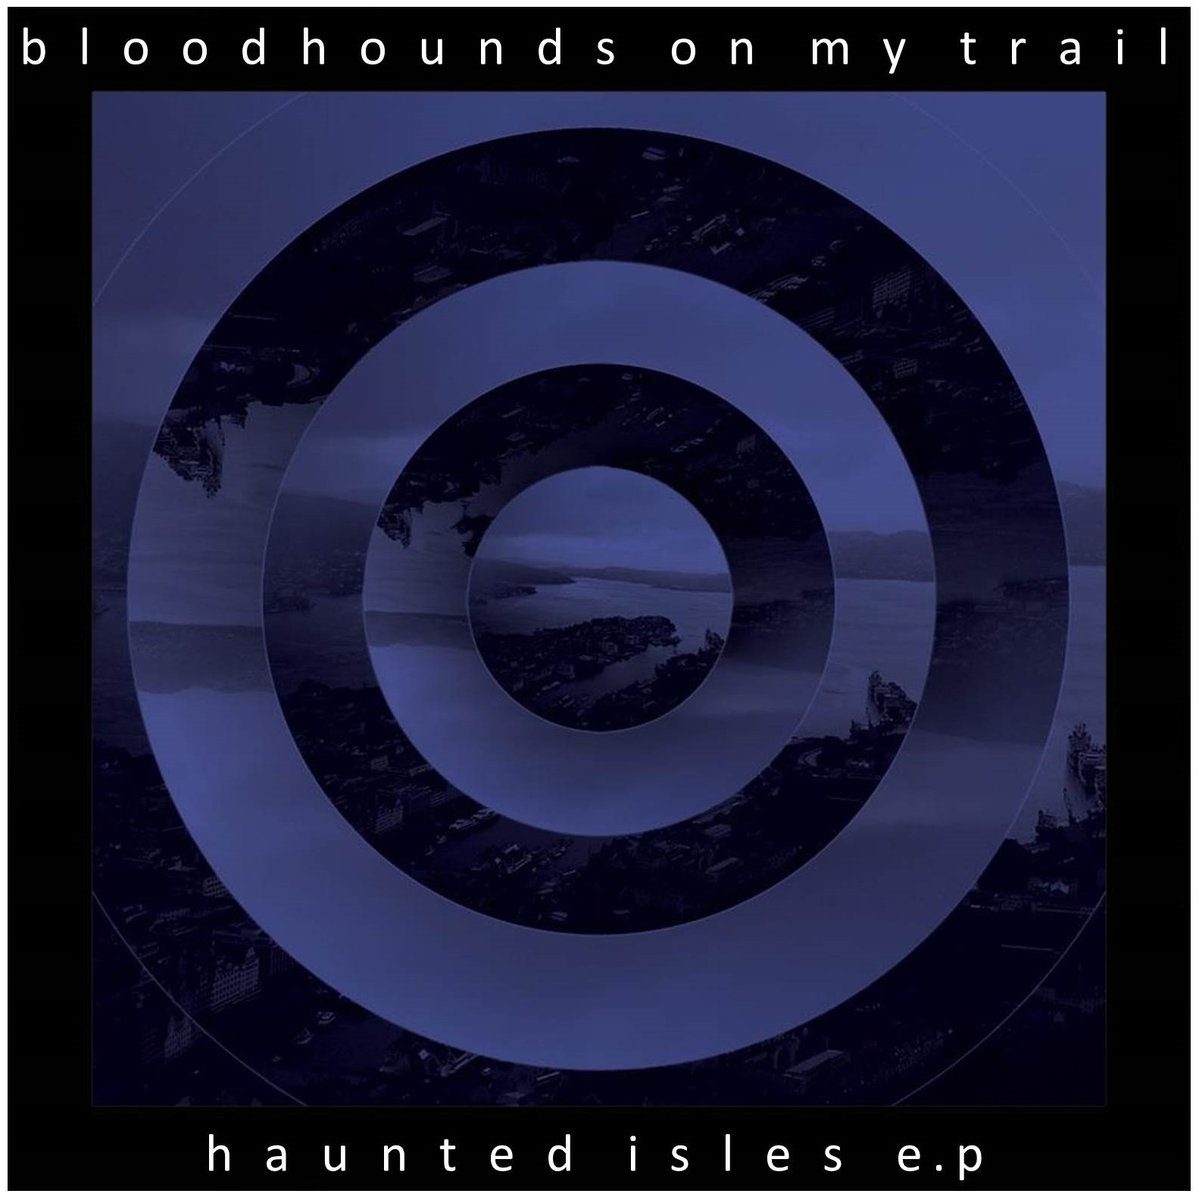 Bloodhounds - Haunted Isles Ep - In Your Eyes Ezine